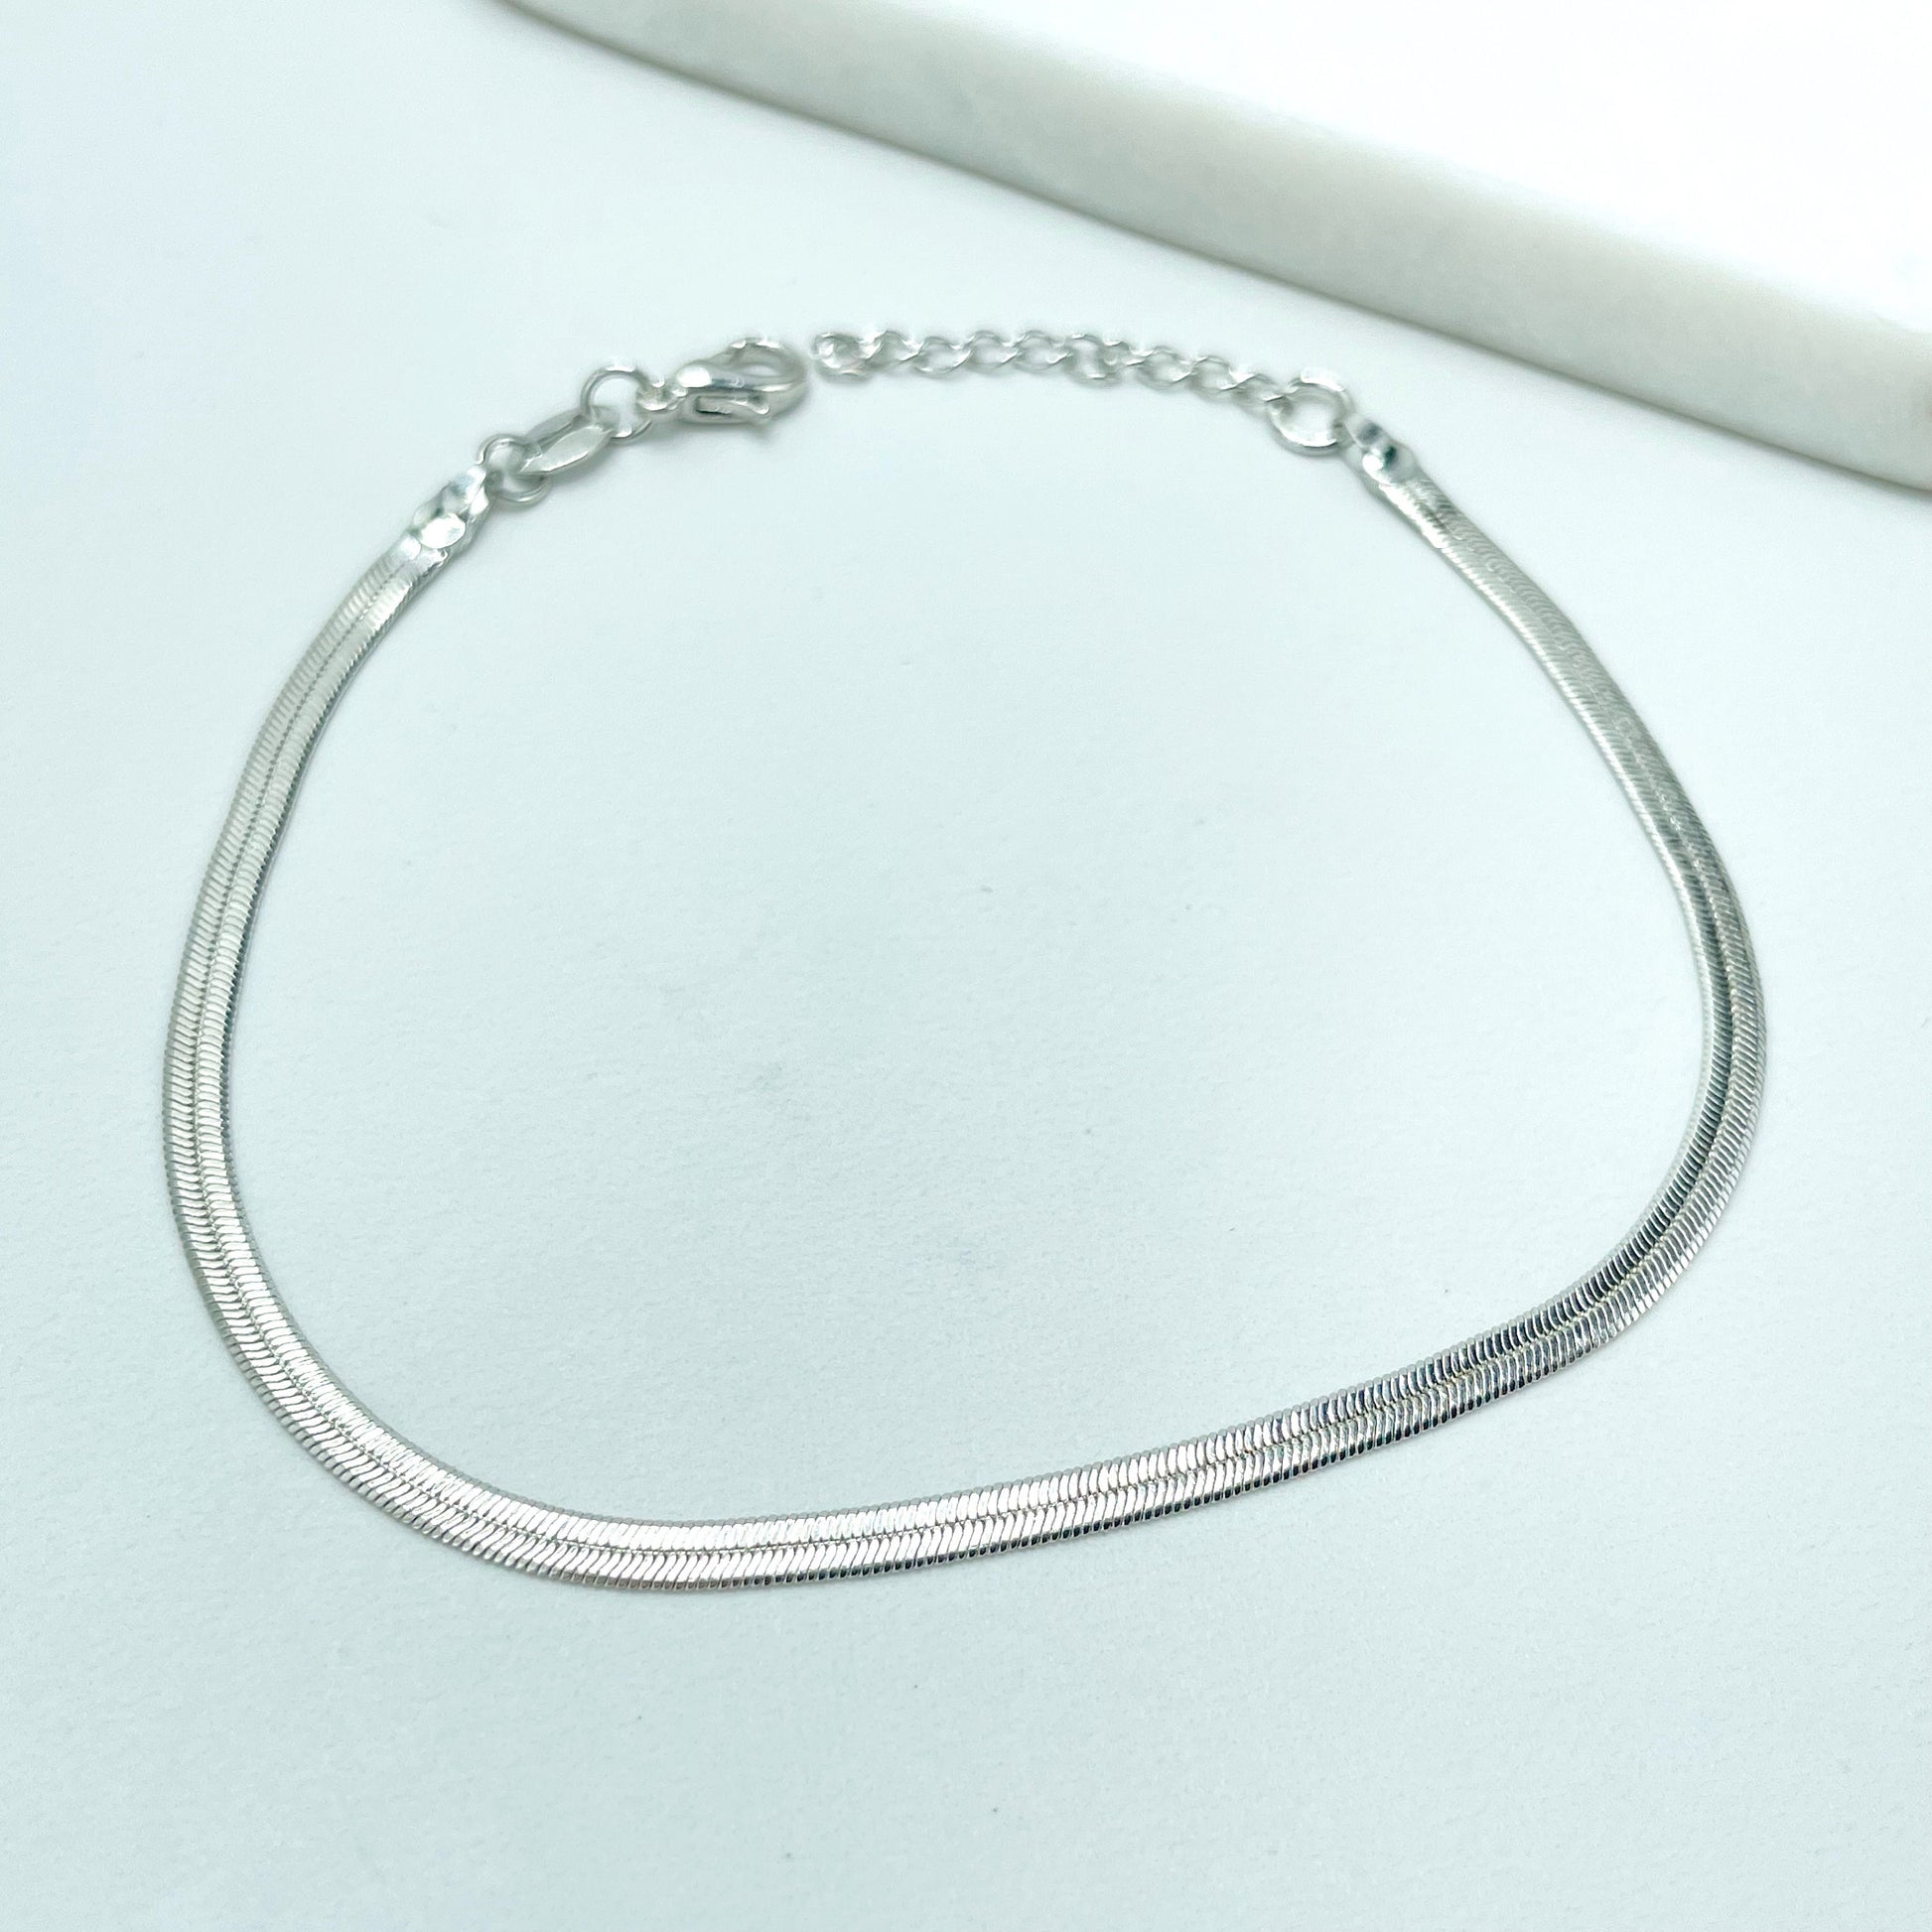 Silver Filled 3mm Herringbone Snake Chain, Bracelet or Anklet, Wholesale Jewelry Making Supplies